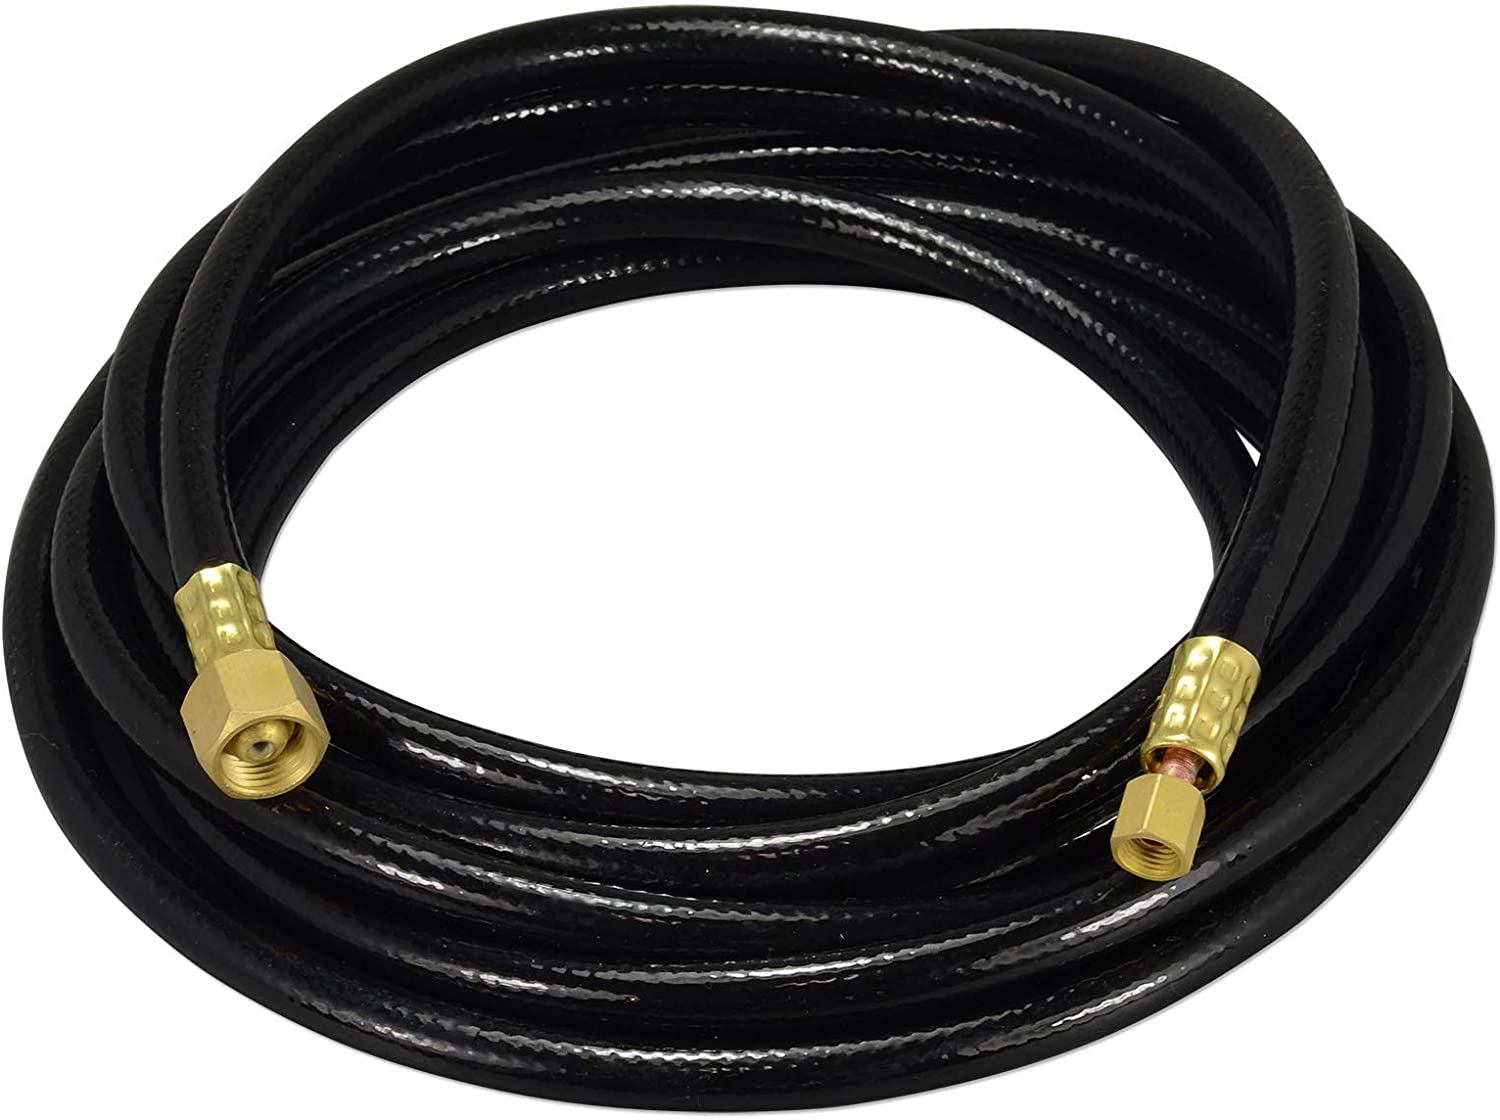 Power Cable Hose for PT-31 Plasma Cutter Torch 18" Feet Connector 3/8-24 Inside M16x1.5 (PT-31 18") 